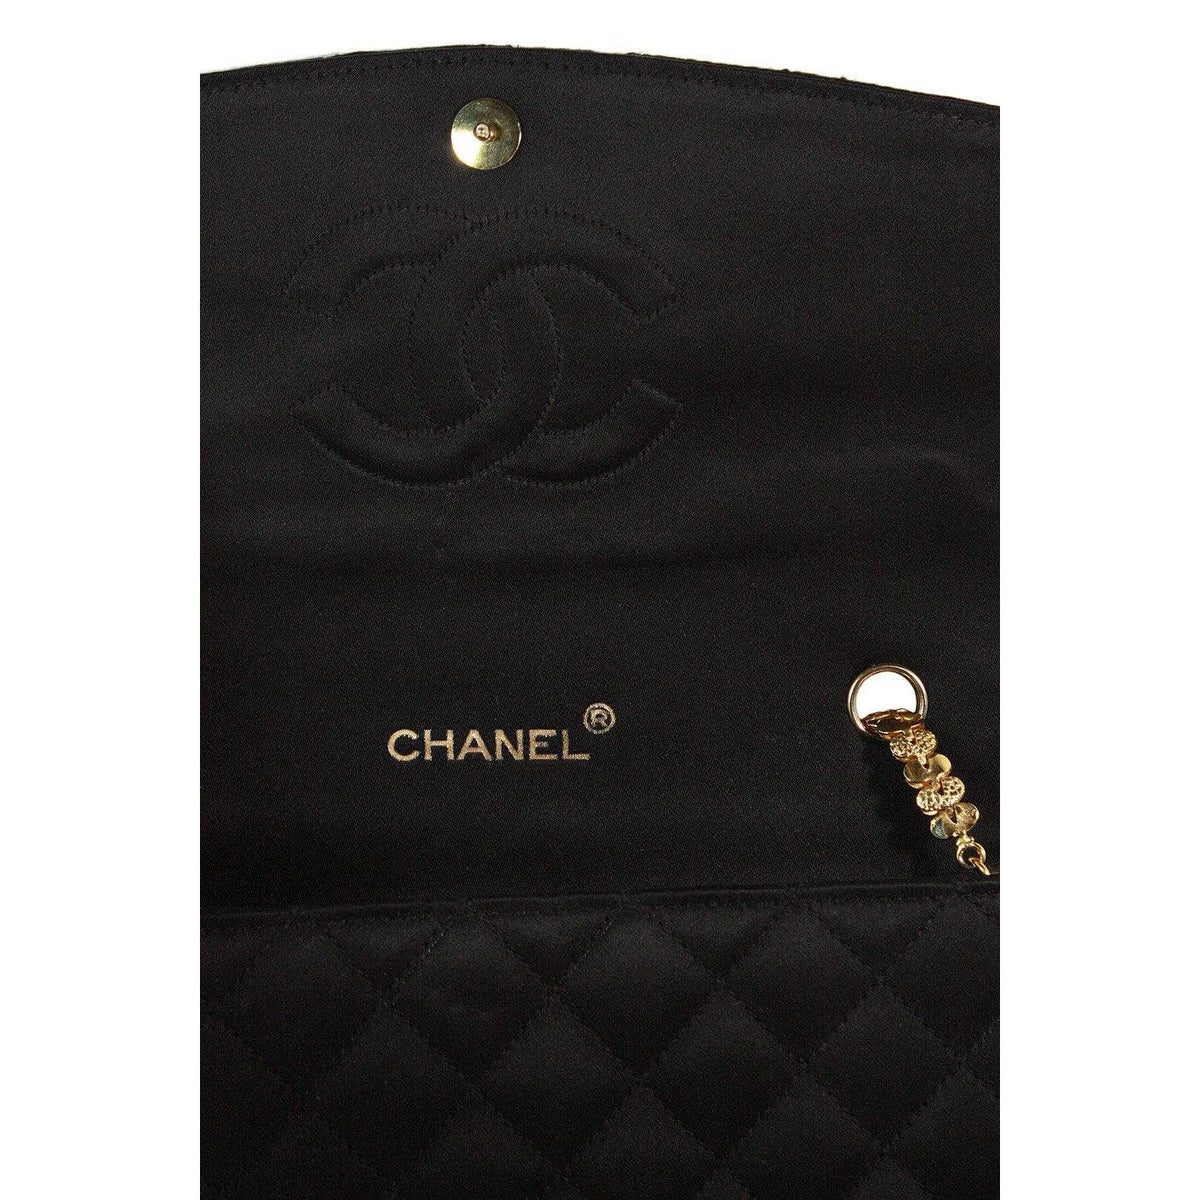 Pre- owned   CHANEL 1990s Gripoix Gold Strap Quilted Black Satin Purse - theREMODA